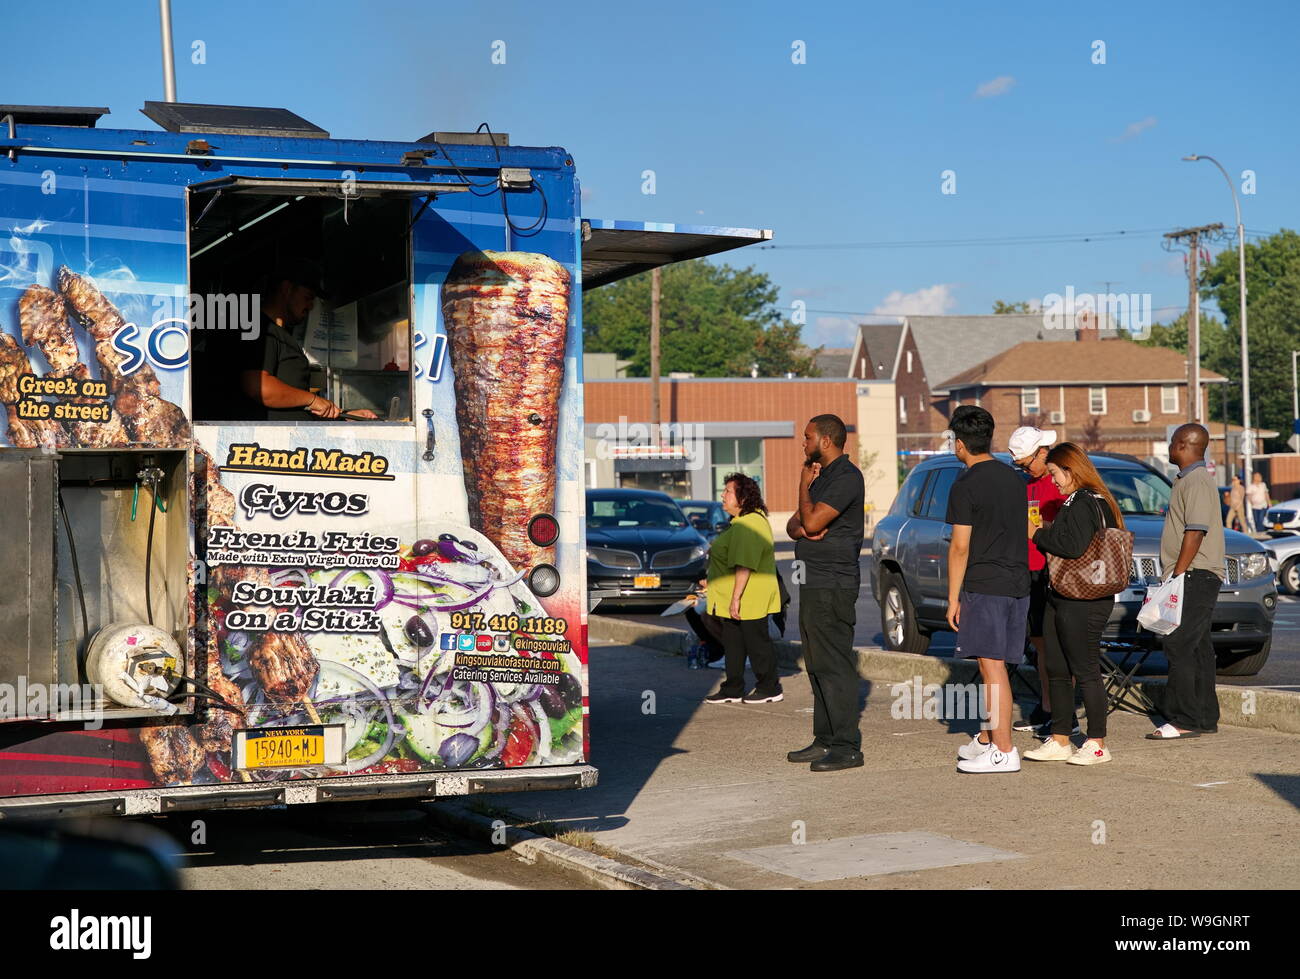 New York, NY USA. Aug 2019. Greek gyro food truck serving lunch to a multi ethnic community in Queens NY. Stock Photo